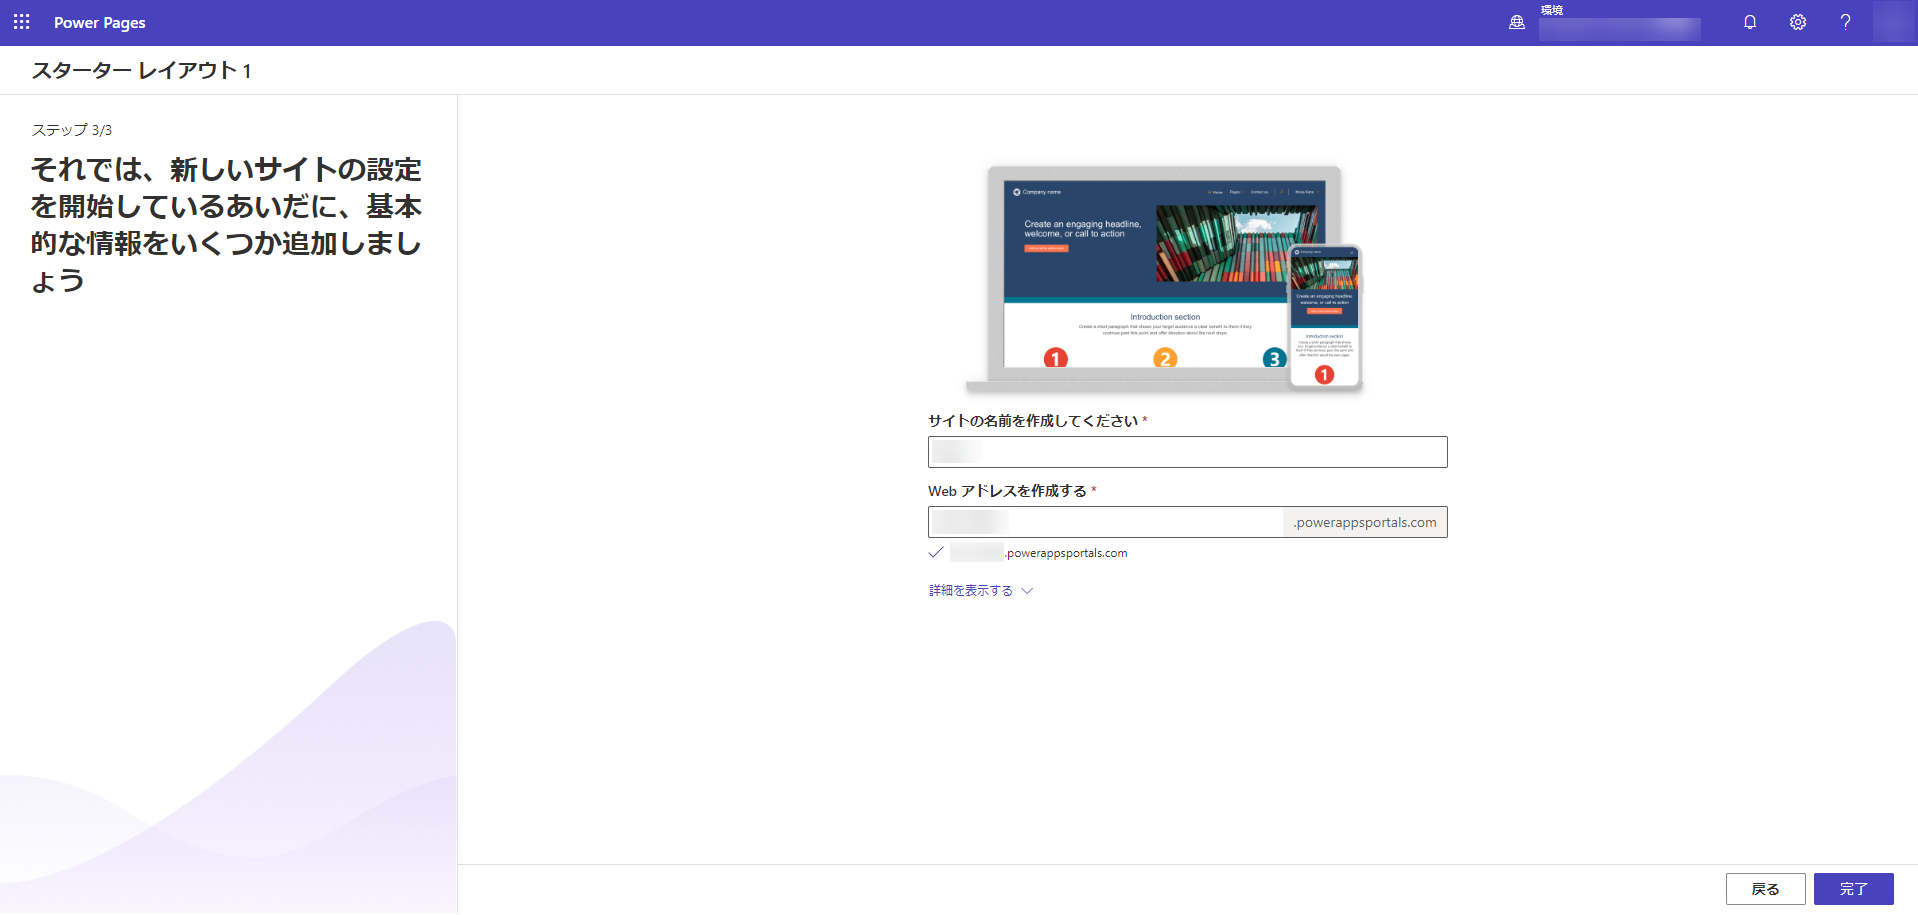 Power Pages サイトを作成します。